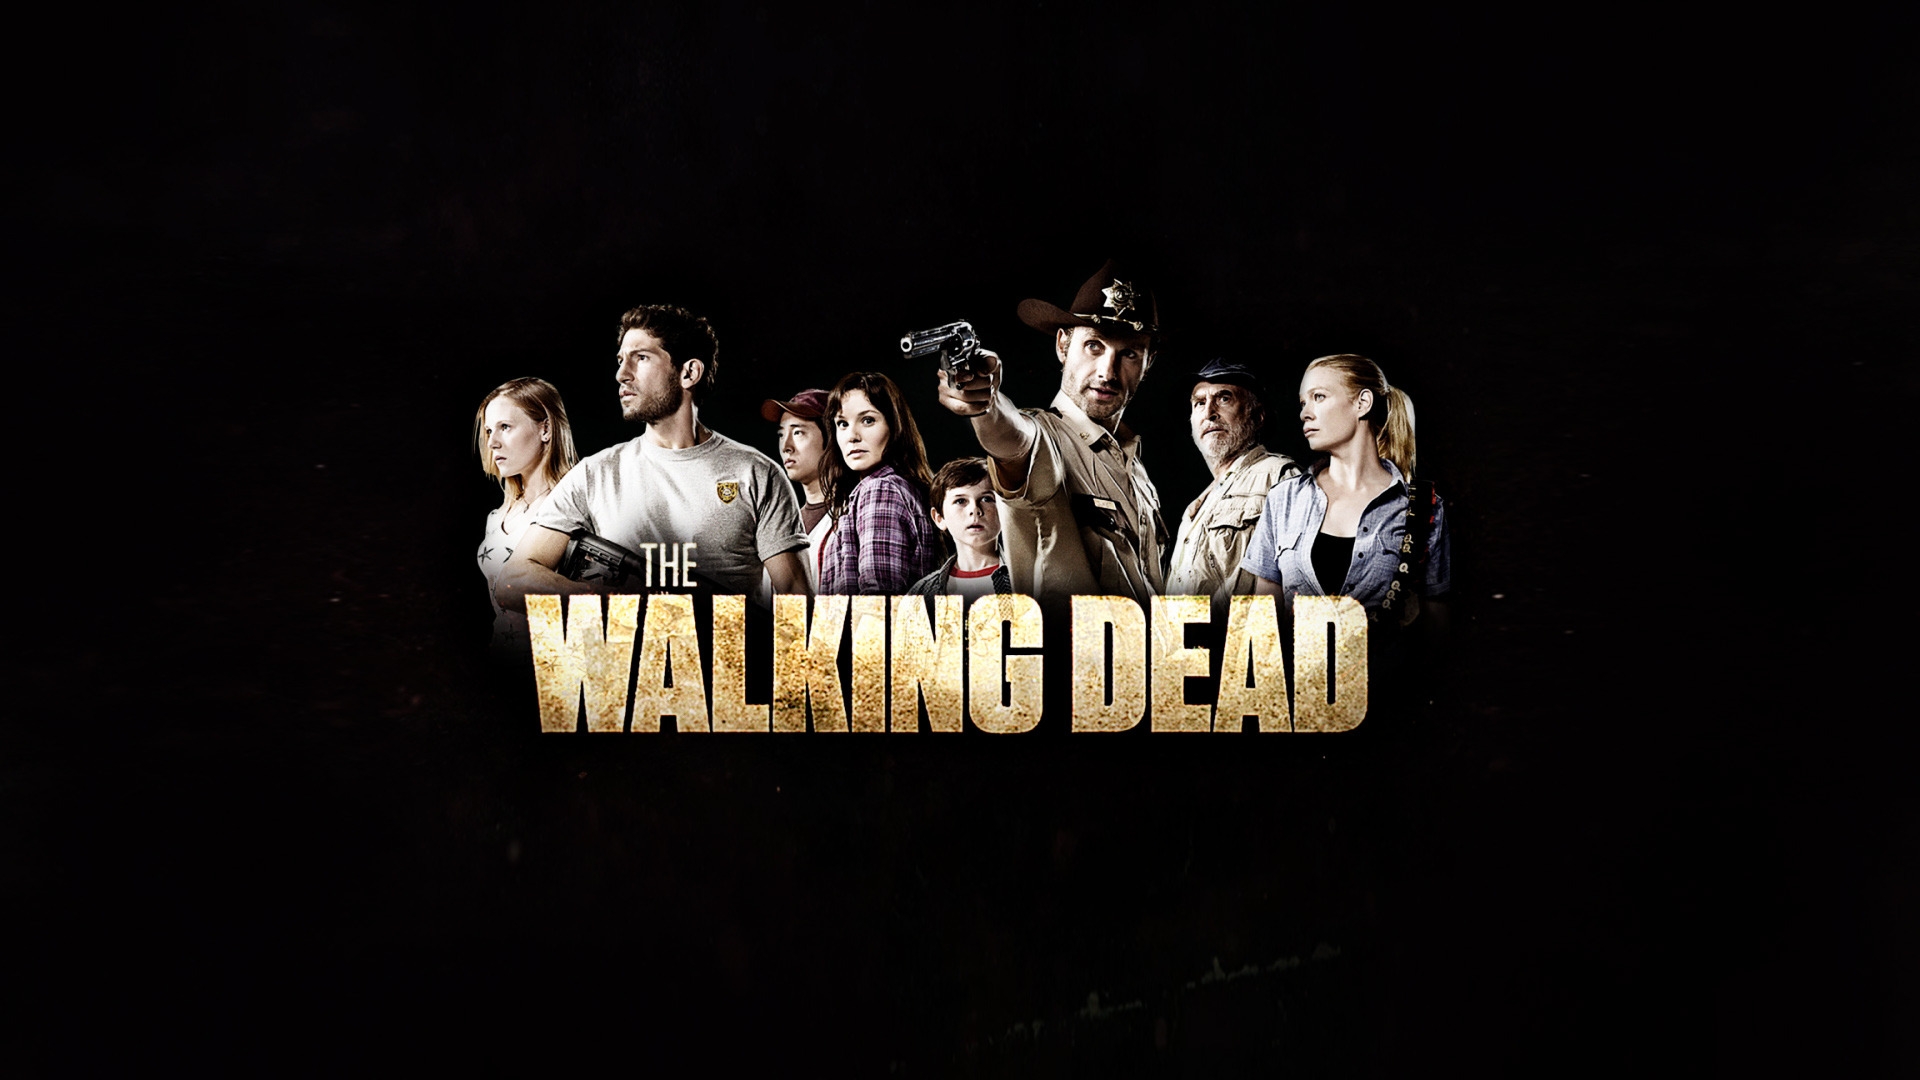 The Walking Dead Poster for 1920 x 1080 HDTV 1080p resolution